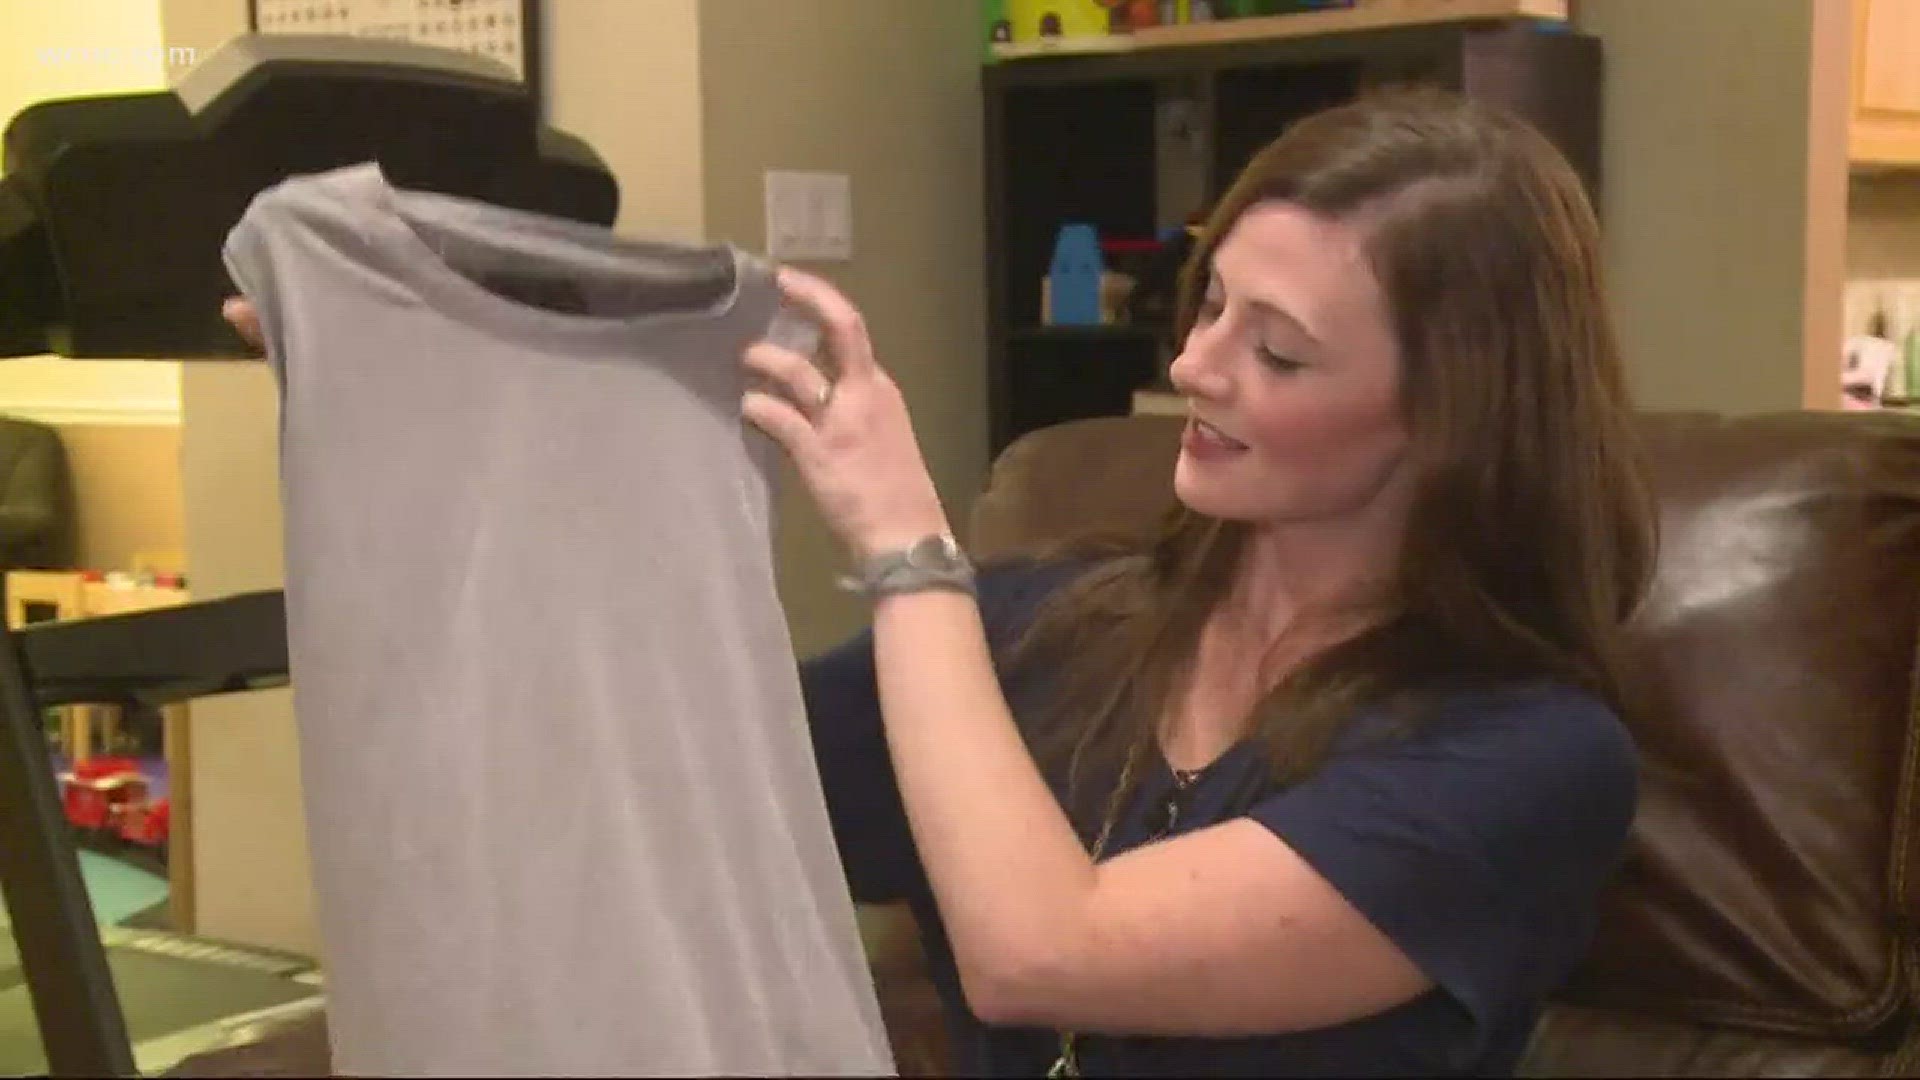 A Charlotte-area woman says she was kicked out of her gym for wearing a tank top.